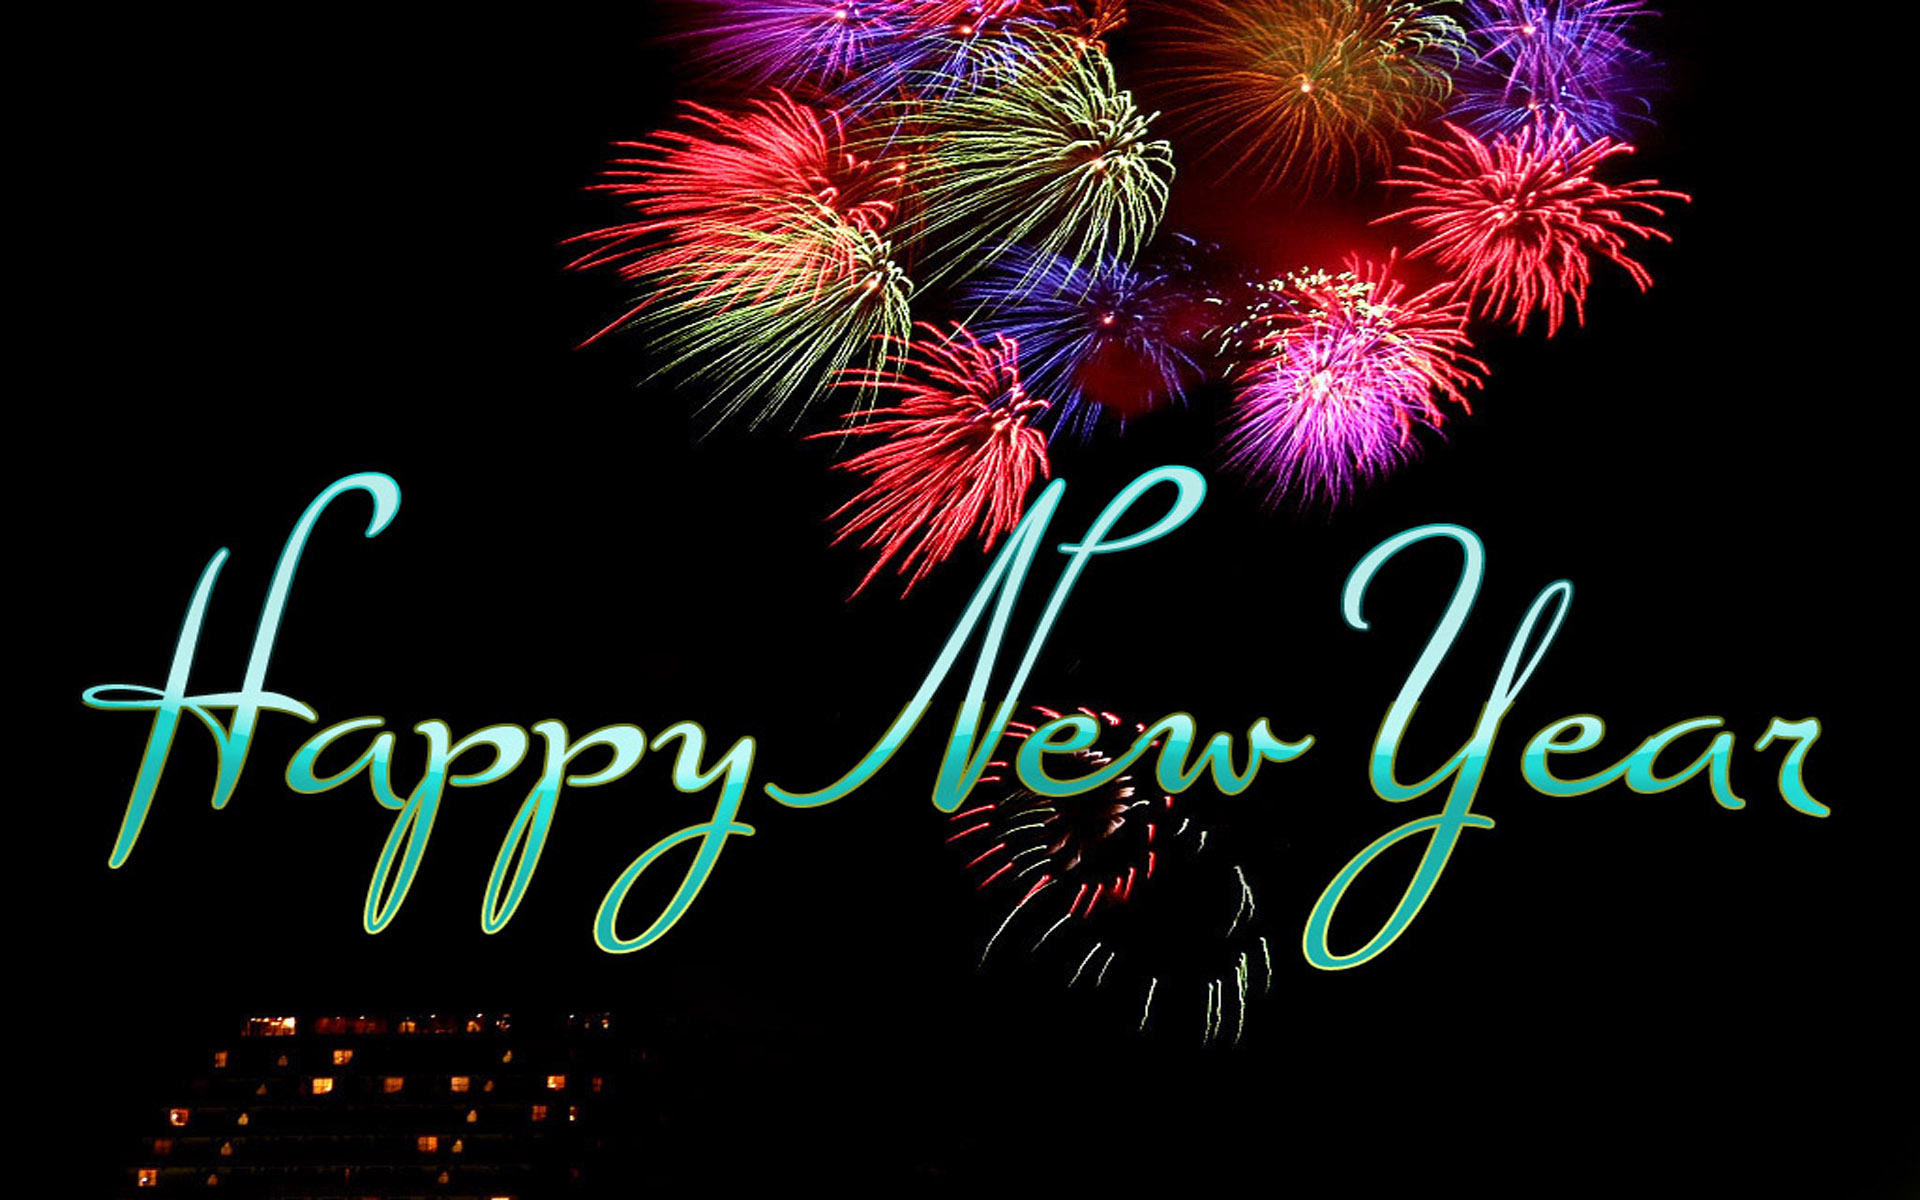 Happy New Year 2016 GIF Images Wallpapers Happy New